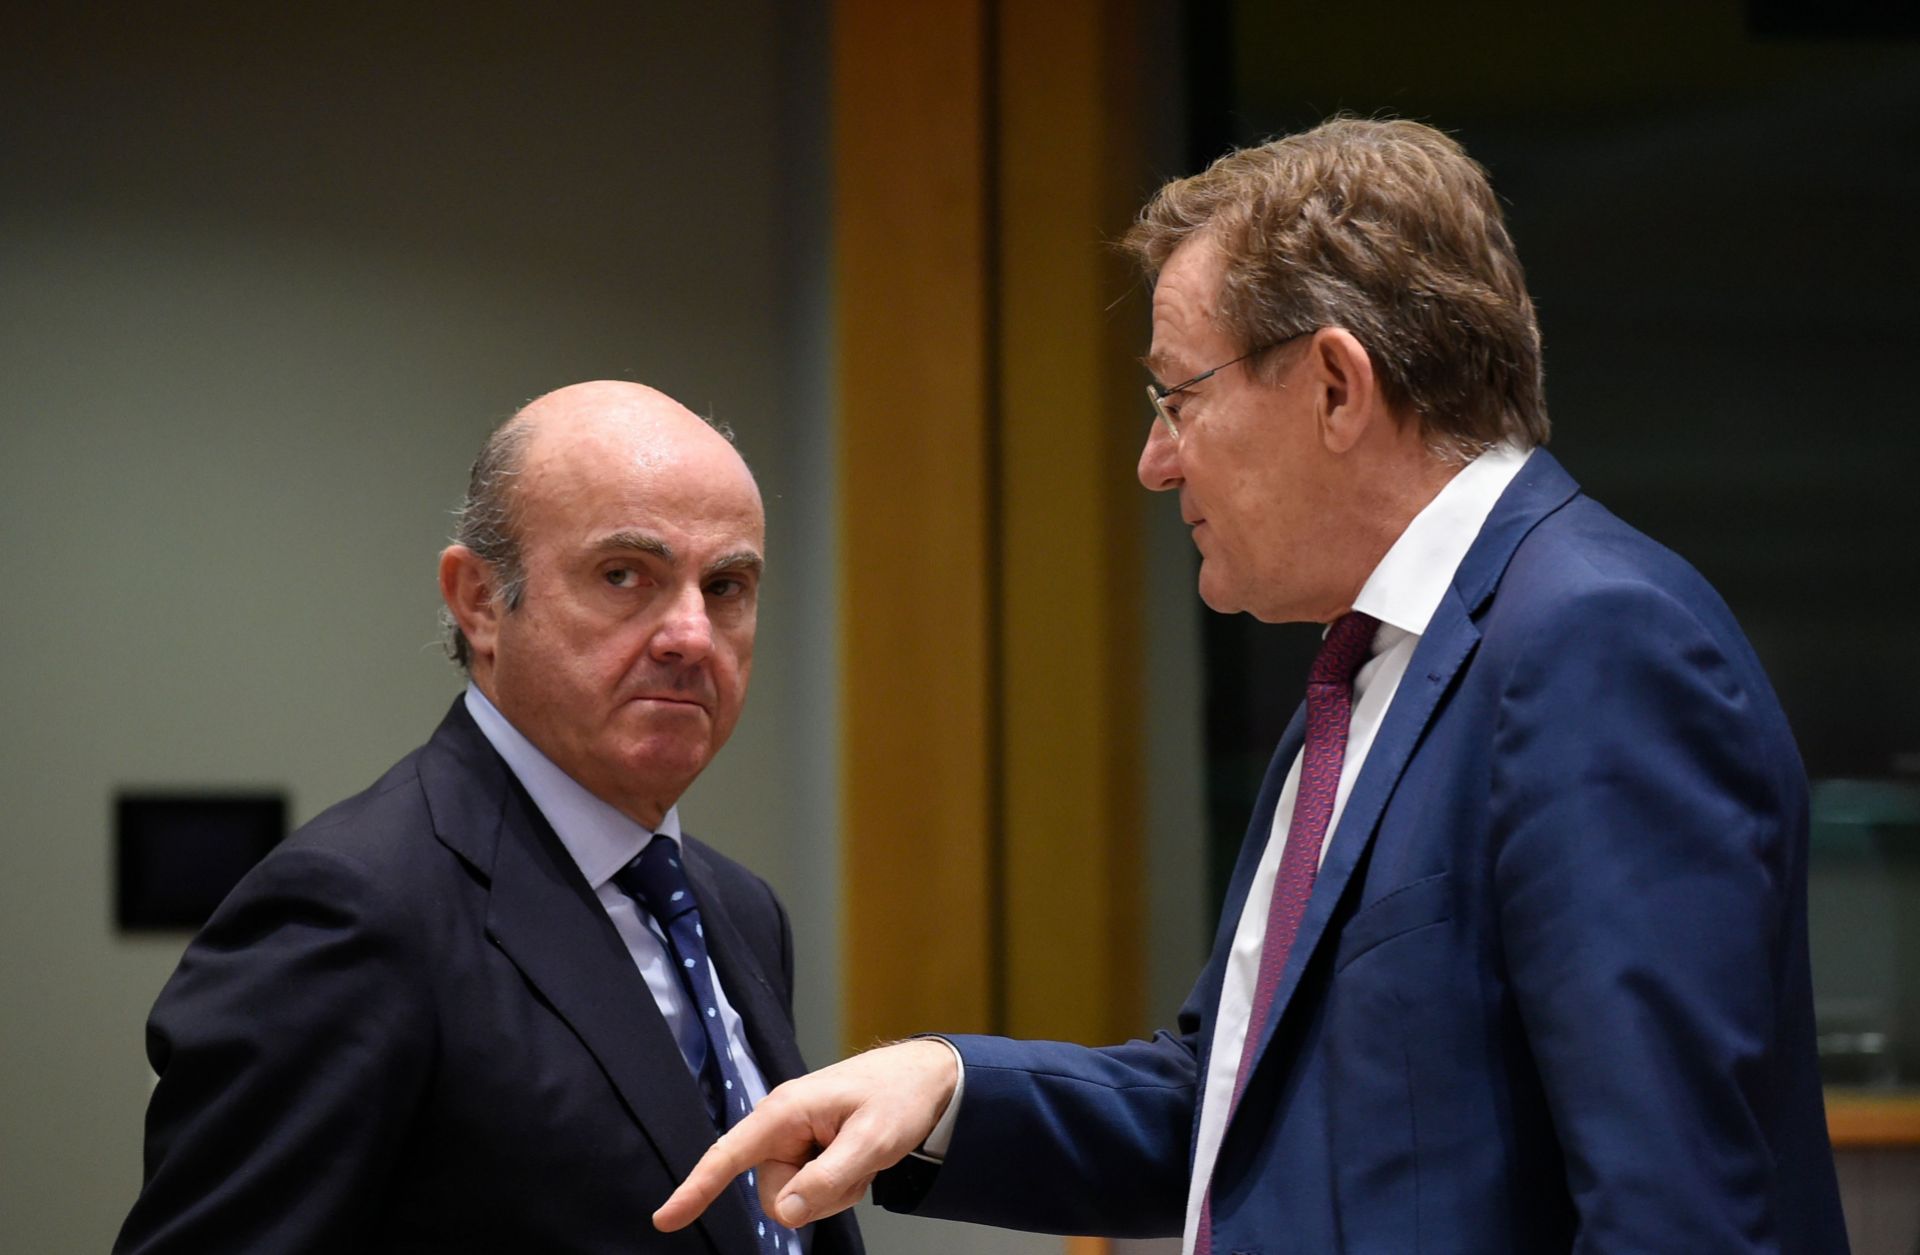 Spanish Economy Minister Luis de Guindos (L) talks with Belgian Finance Minister Johan Van Overtveldt during a meeting in Brussels on Feb. 20.